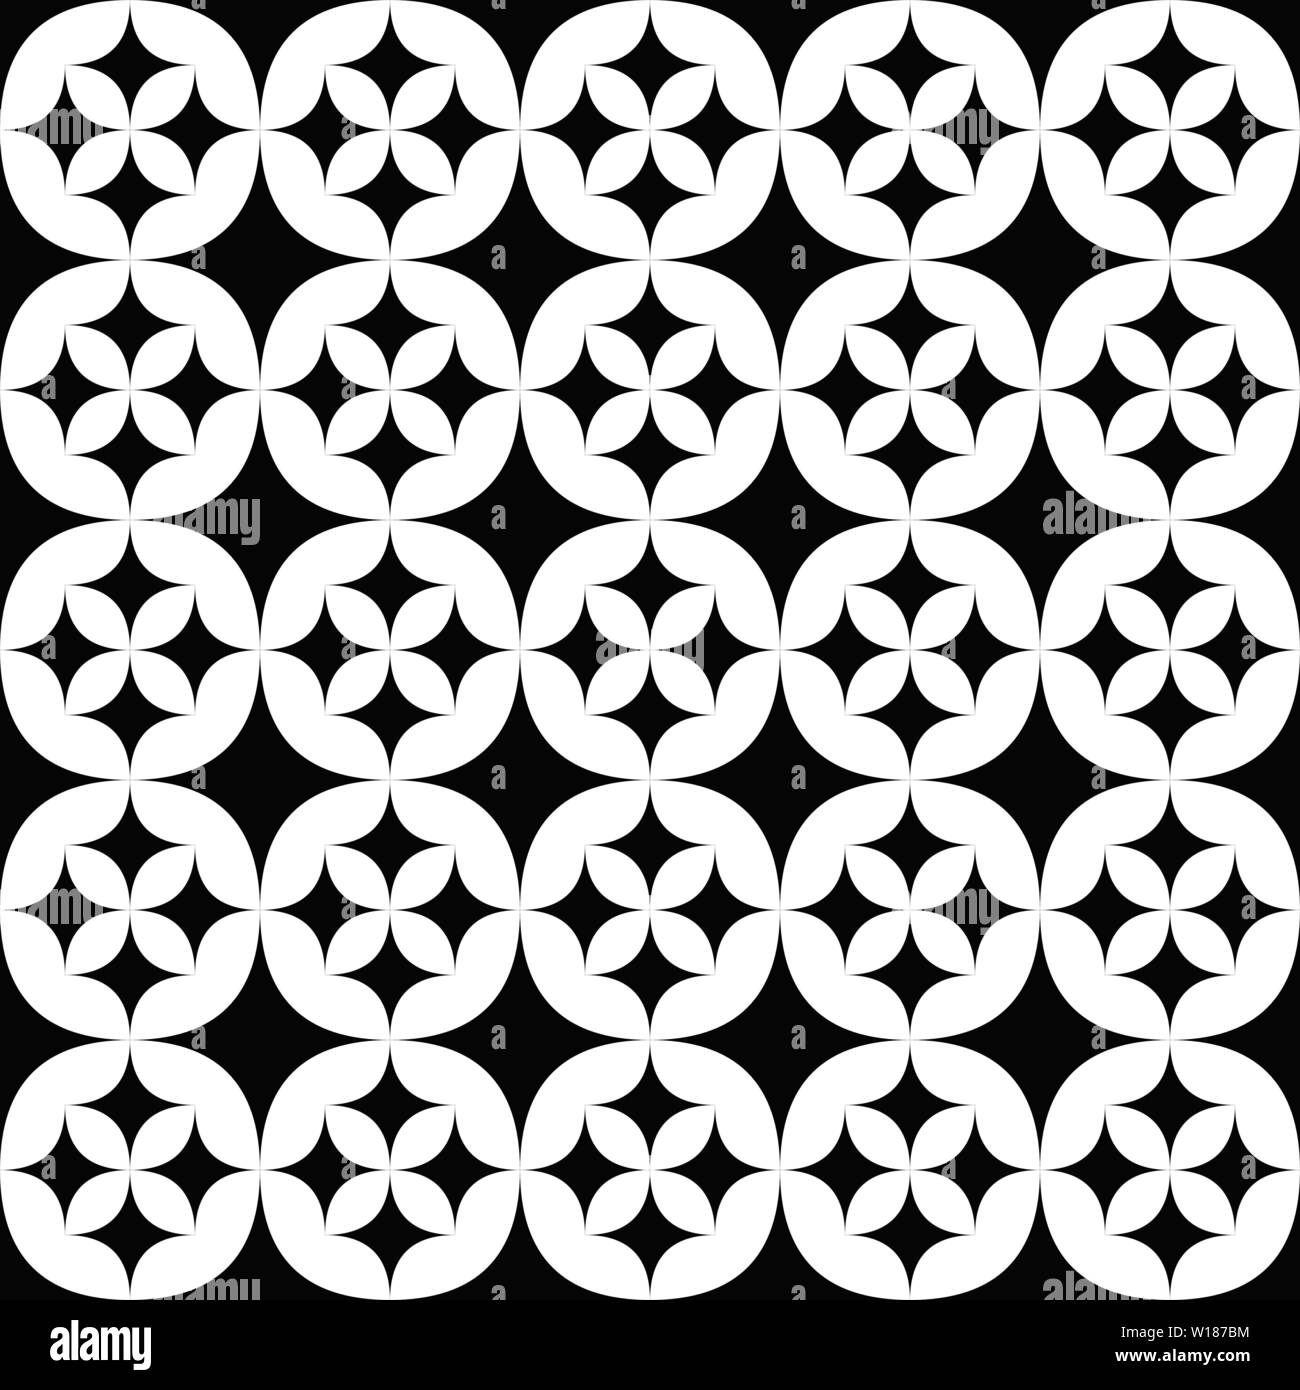 Black And White Seamless Curved Star Pattern Background Design Abstract Vector Illustration 0802